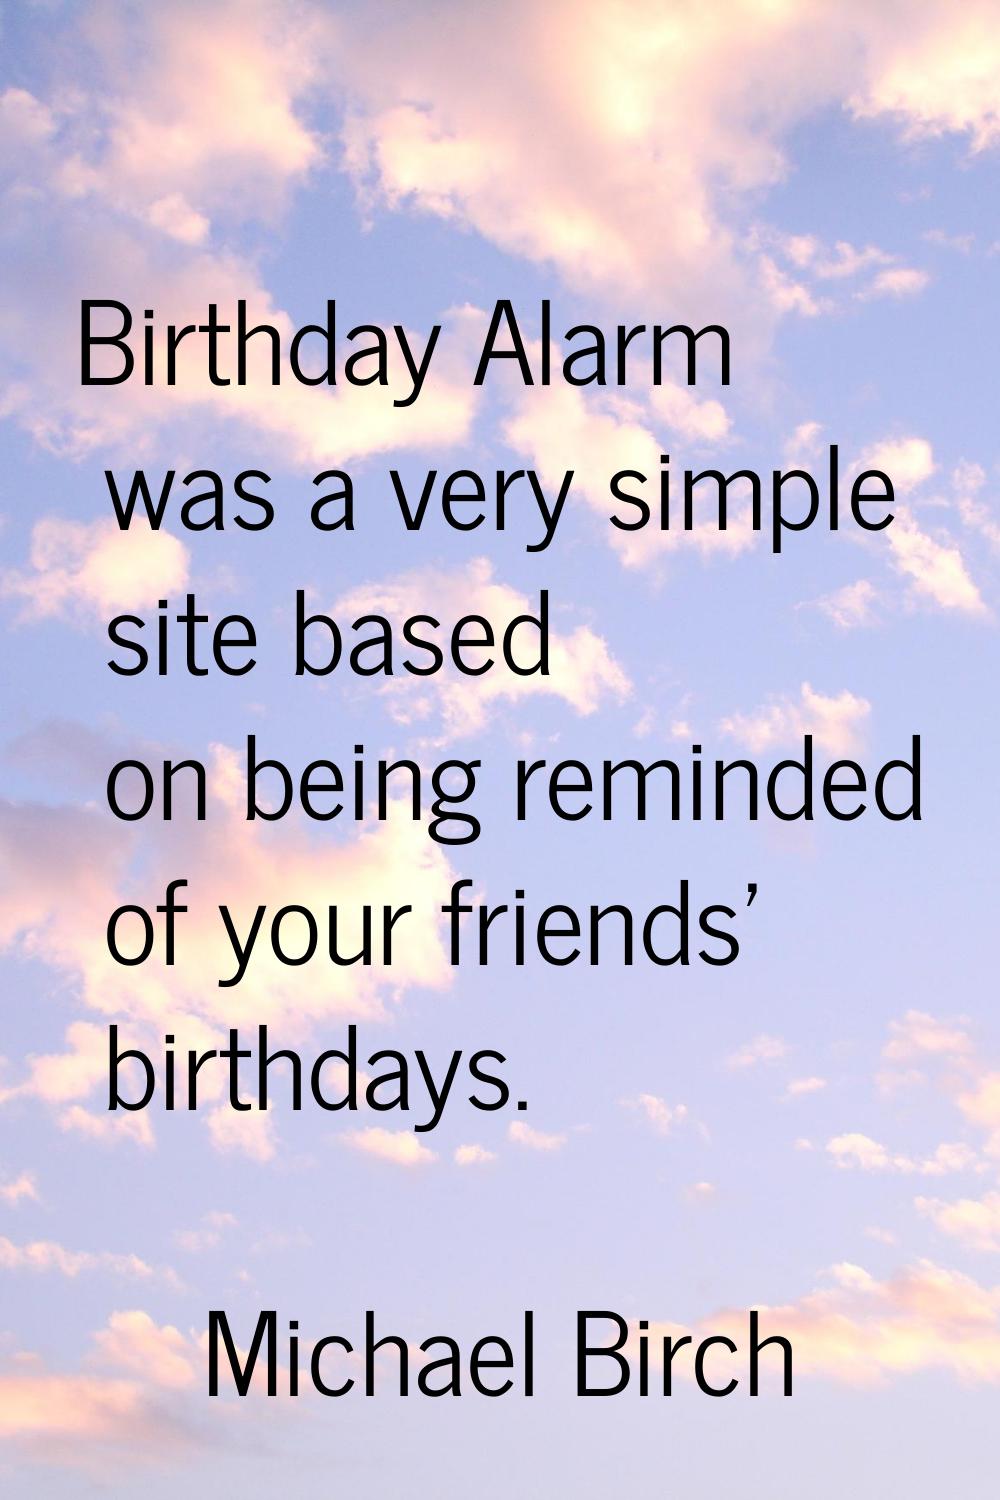 Birthday Alarm was a very simple site based on being reminded of your friends' birthdays.